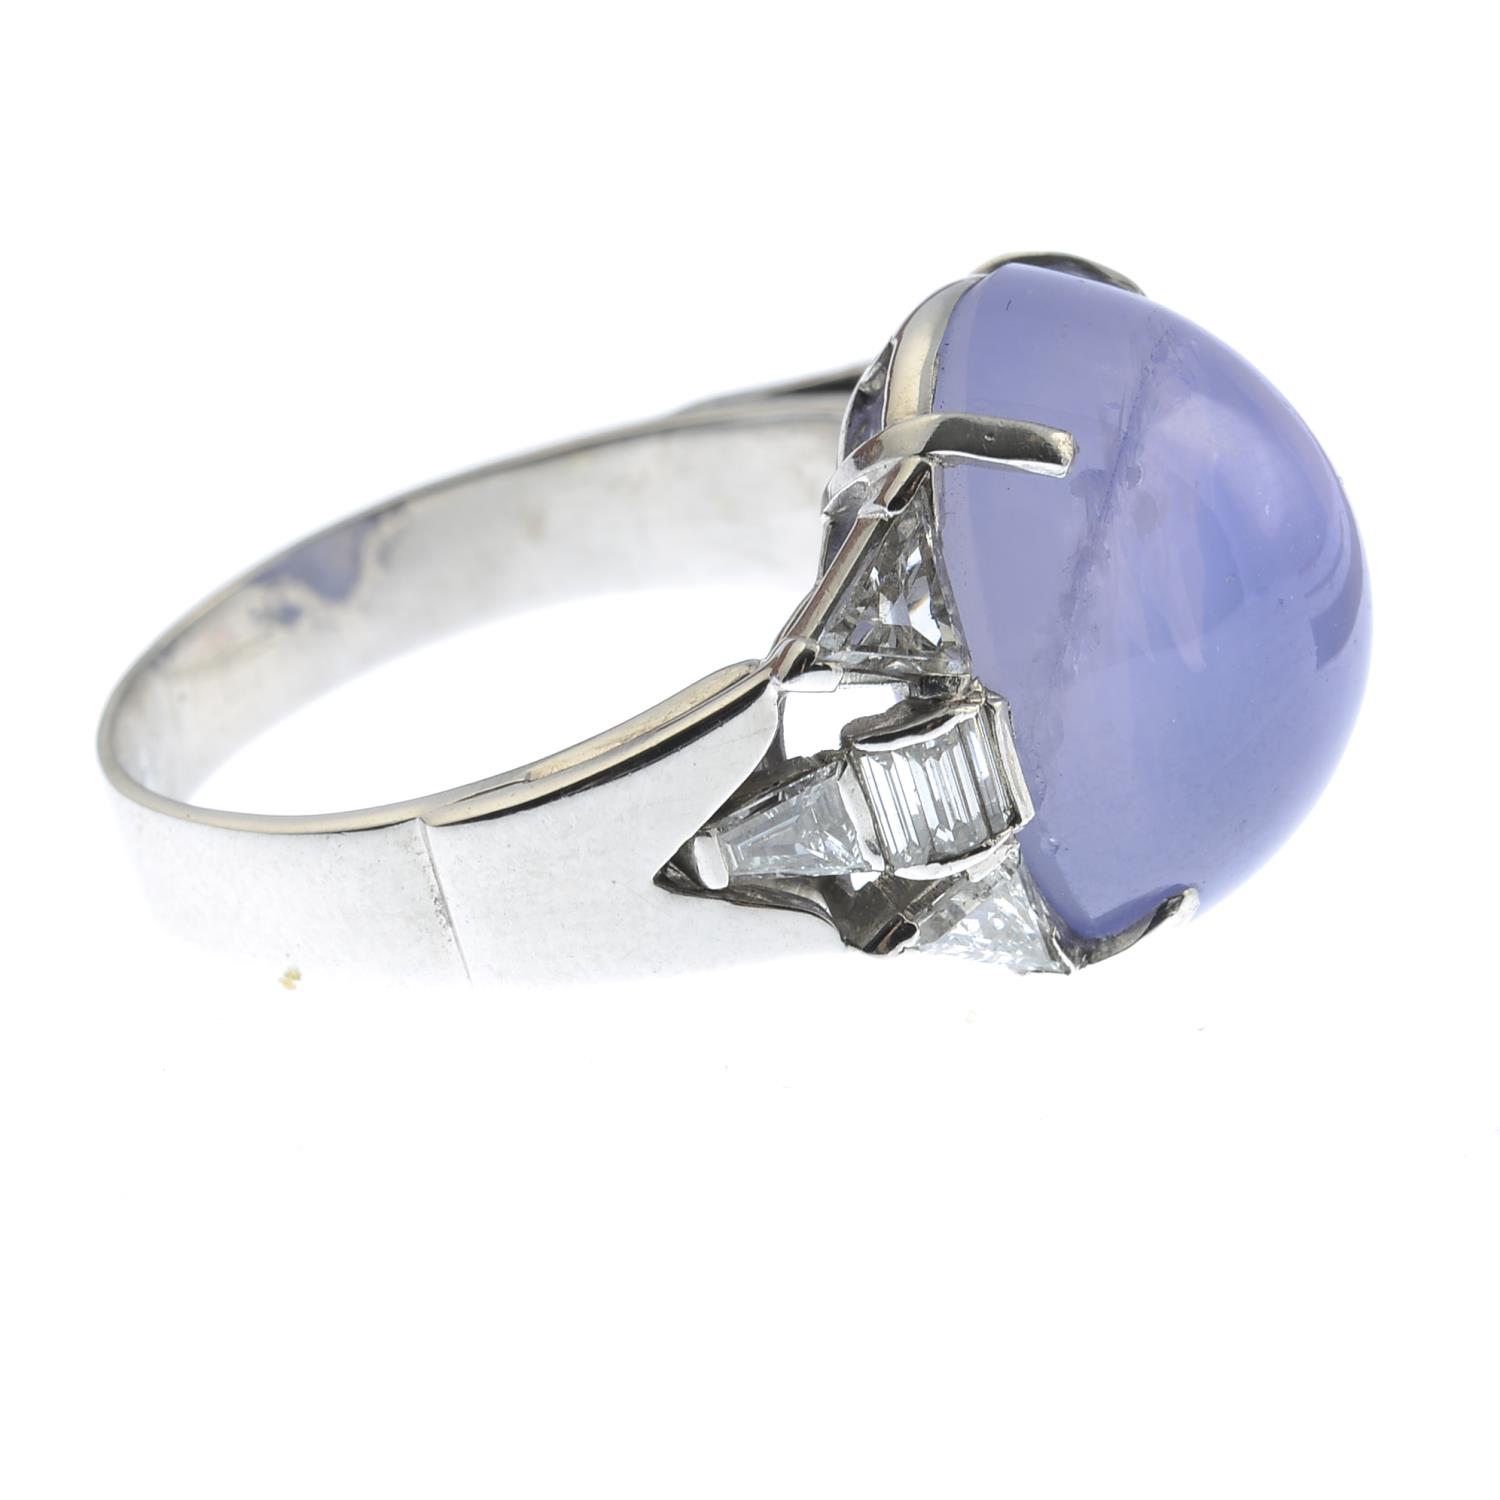 A star sapphire cabochon ring, with vari-cut diamond shoulders. - Image 3 of 6